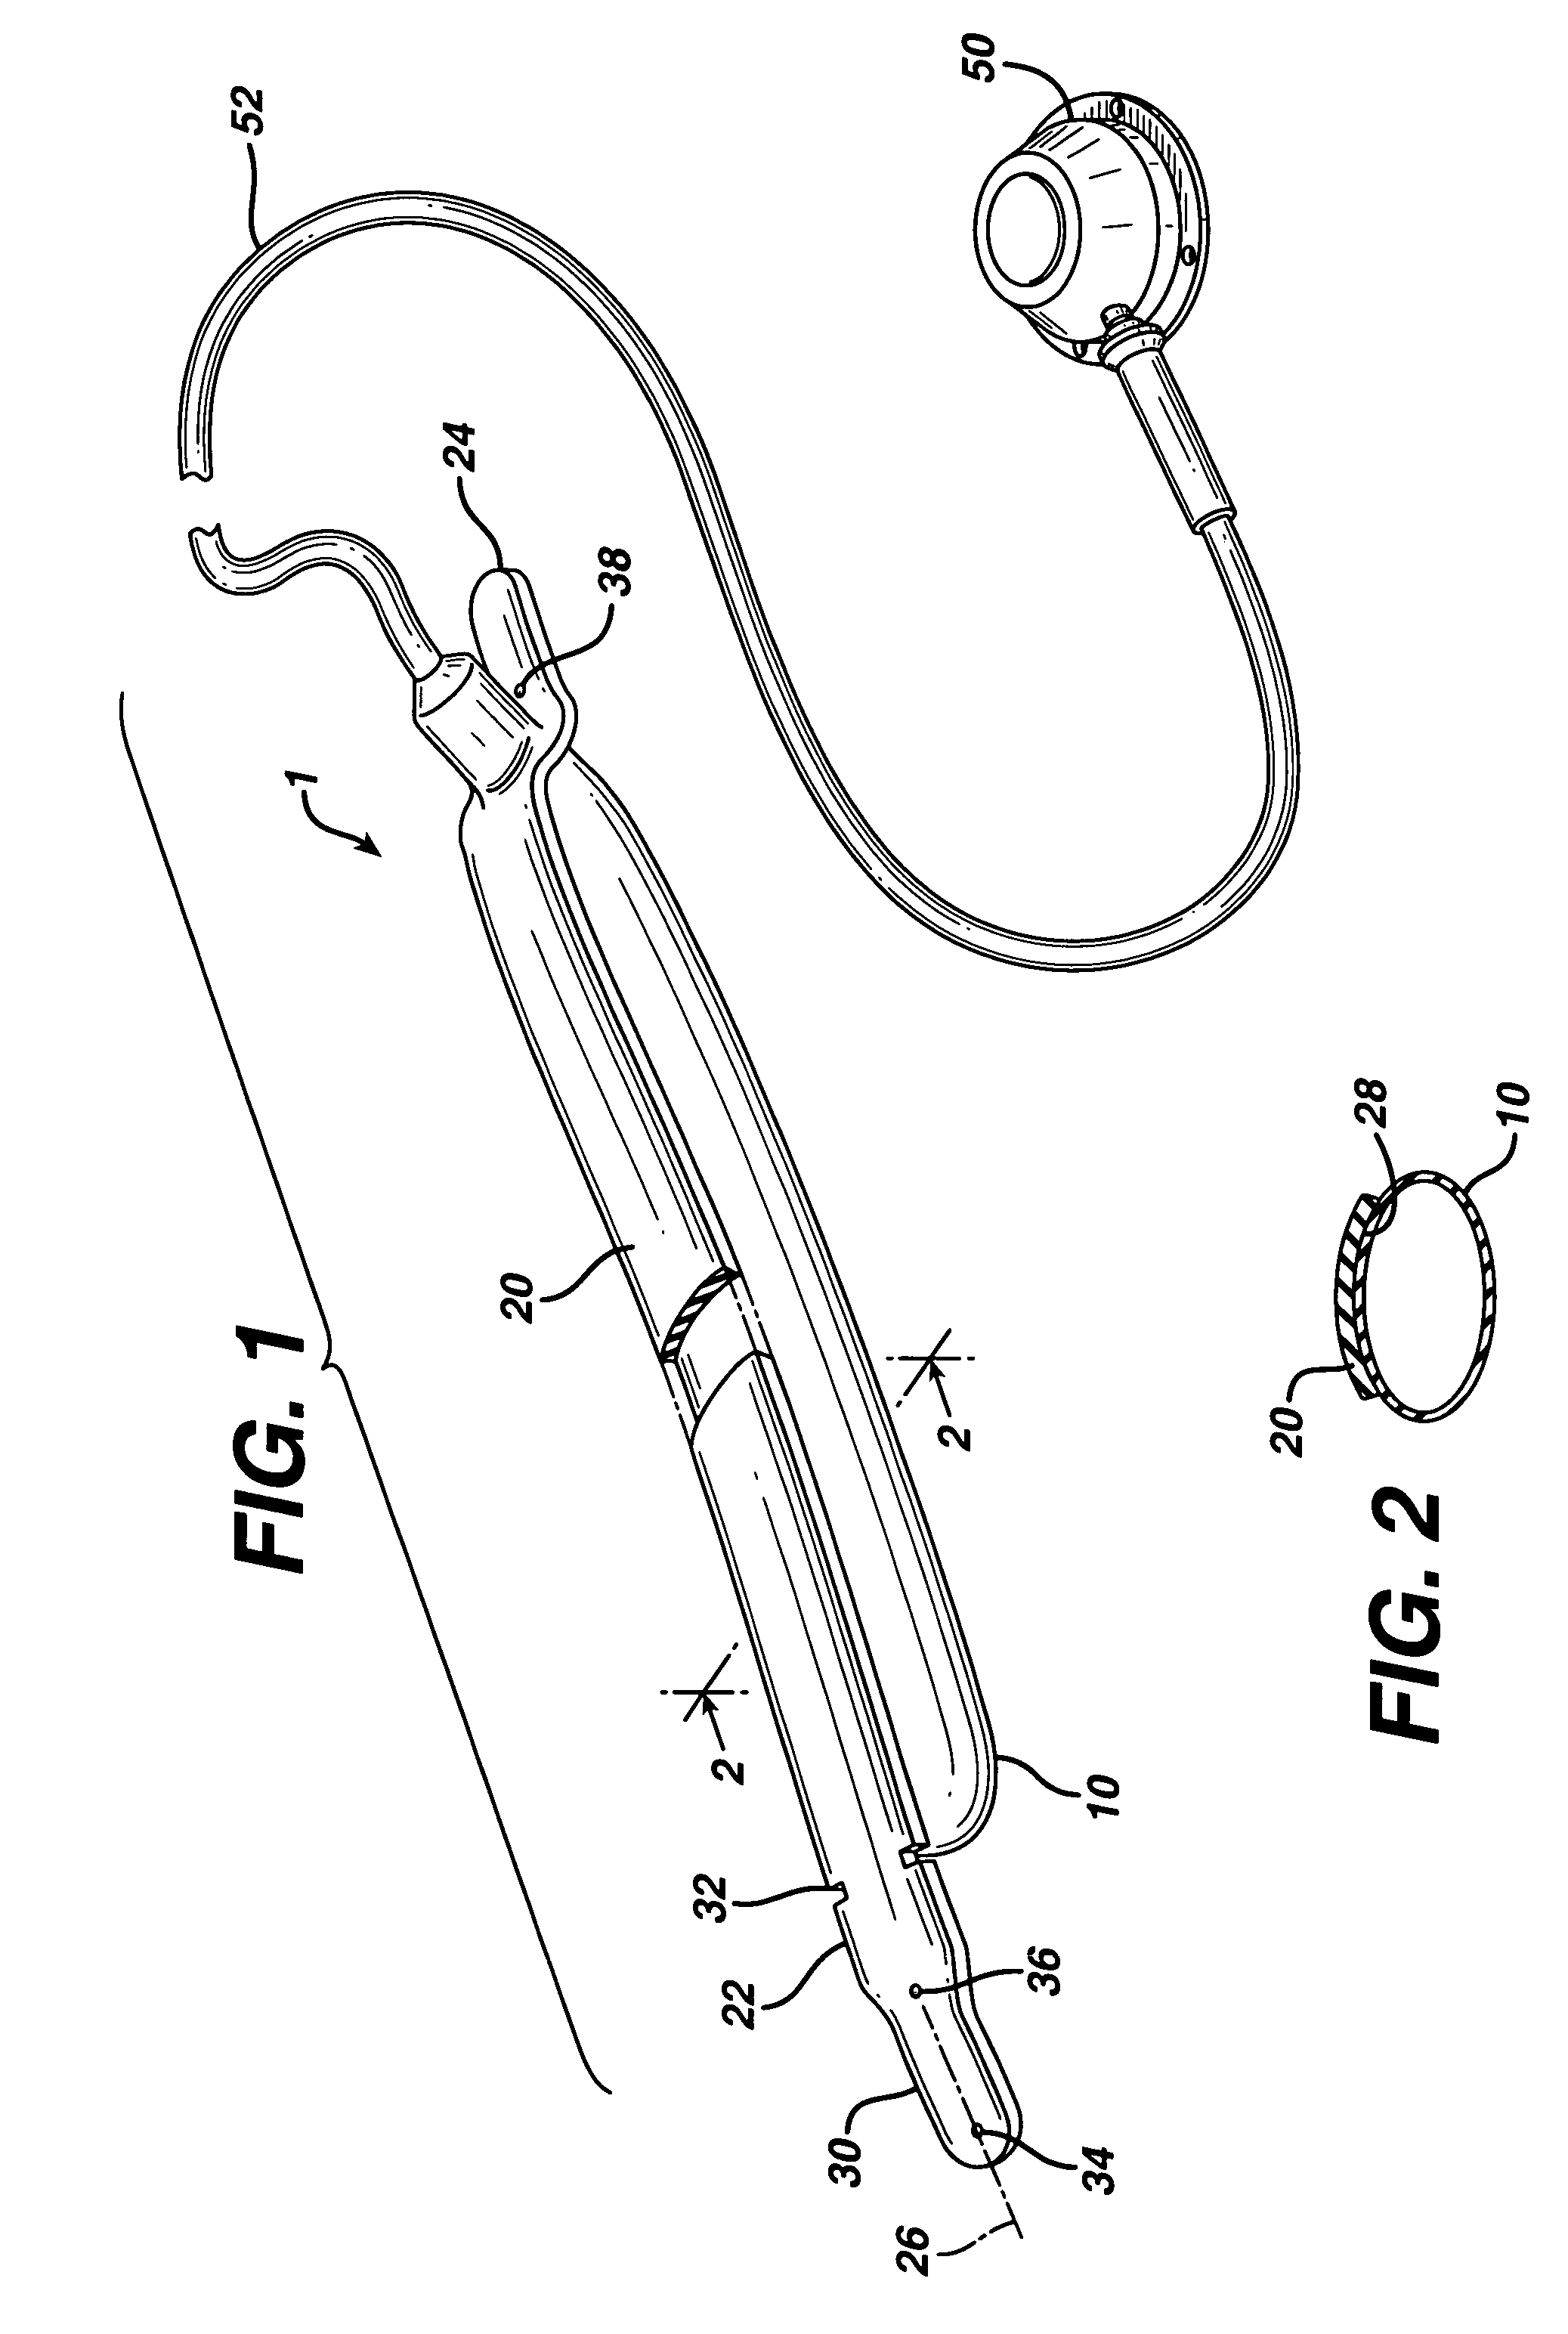 Surgically implantable adjustable band having a flat profile when implanted